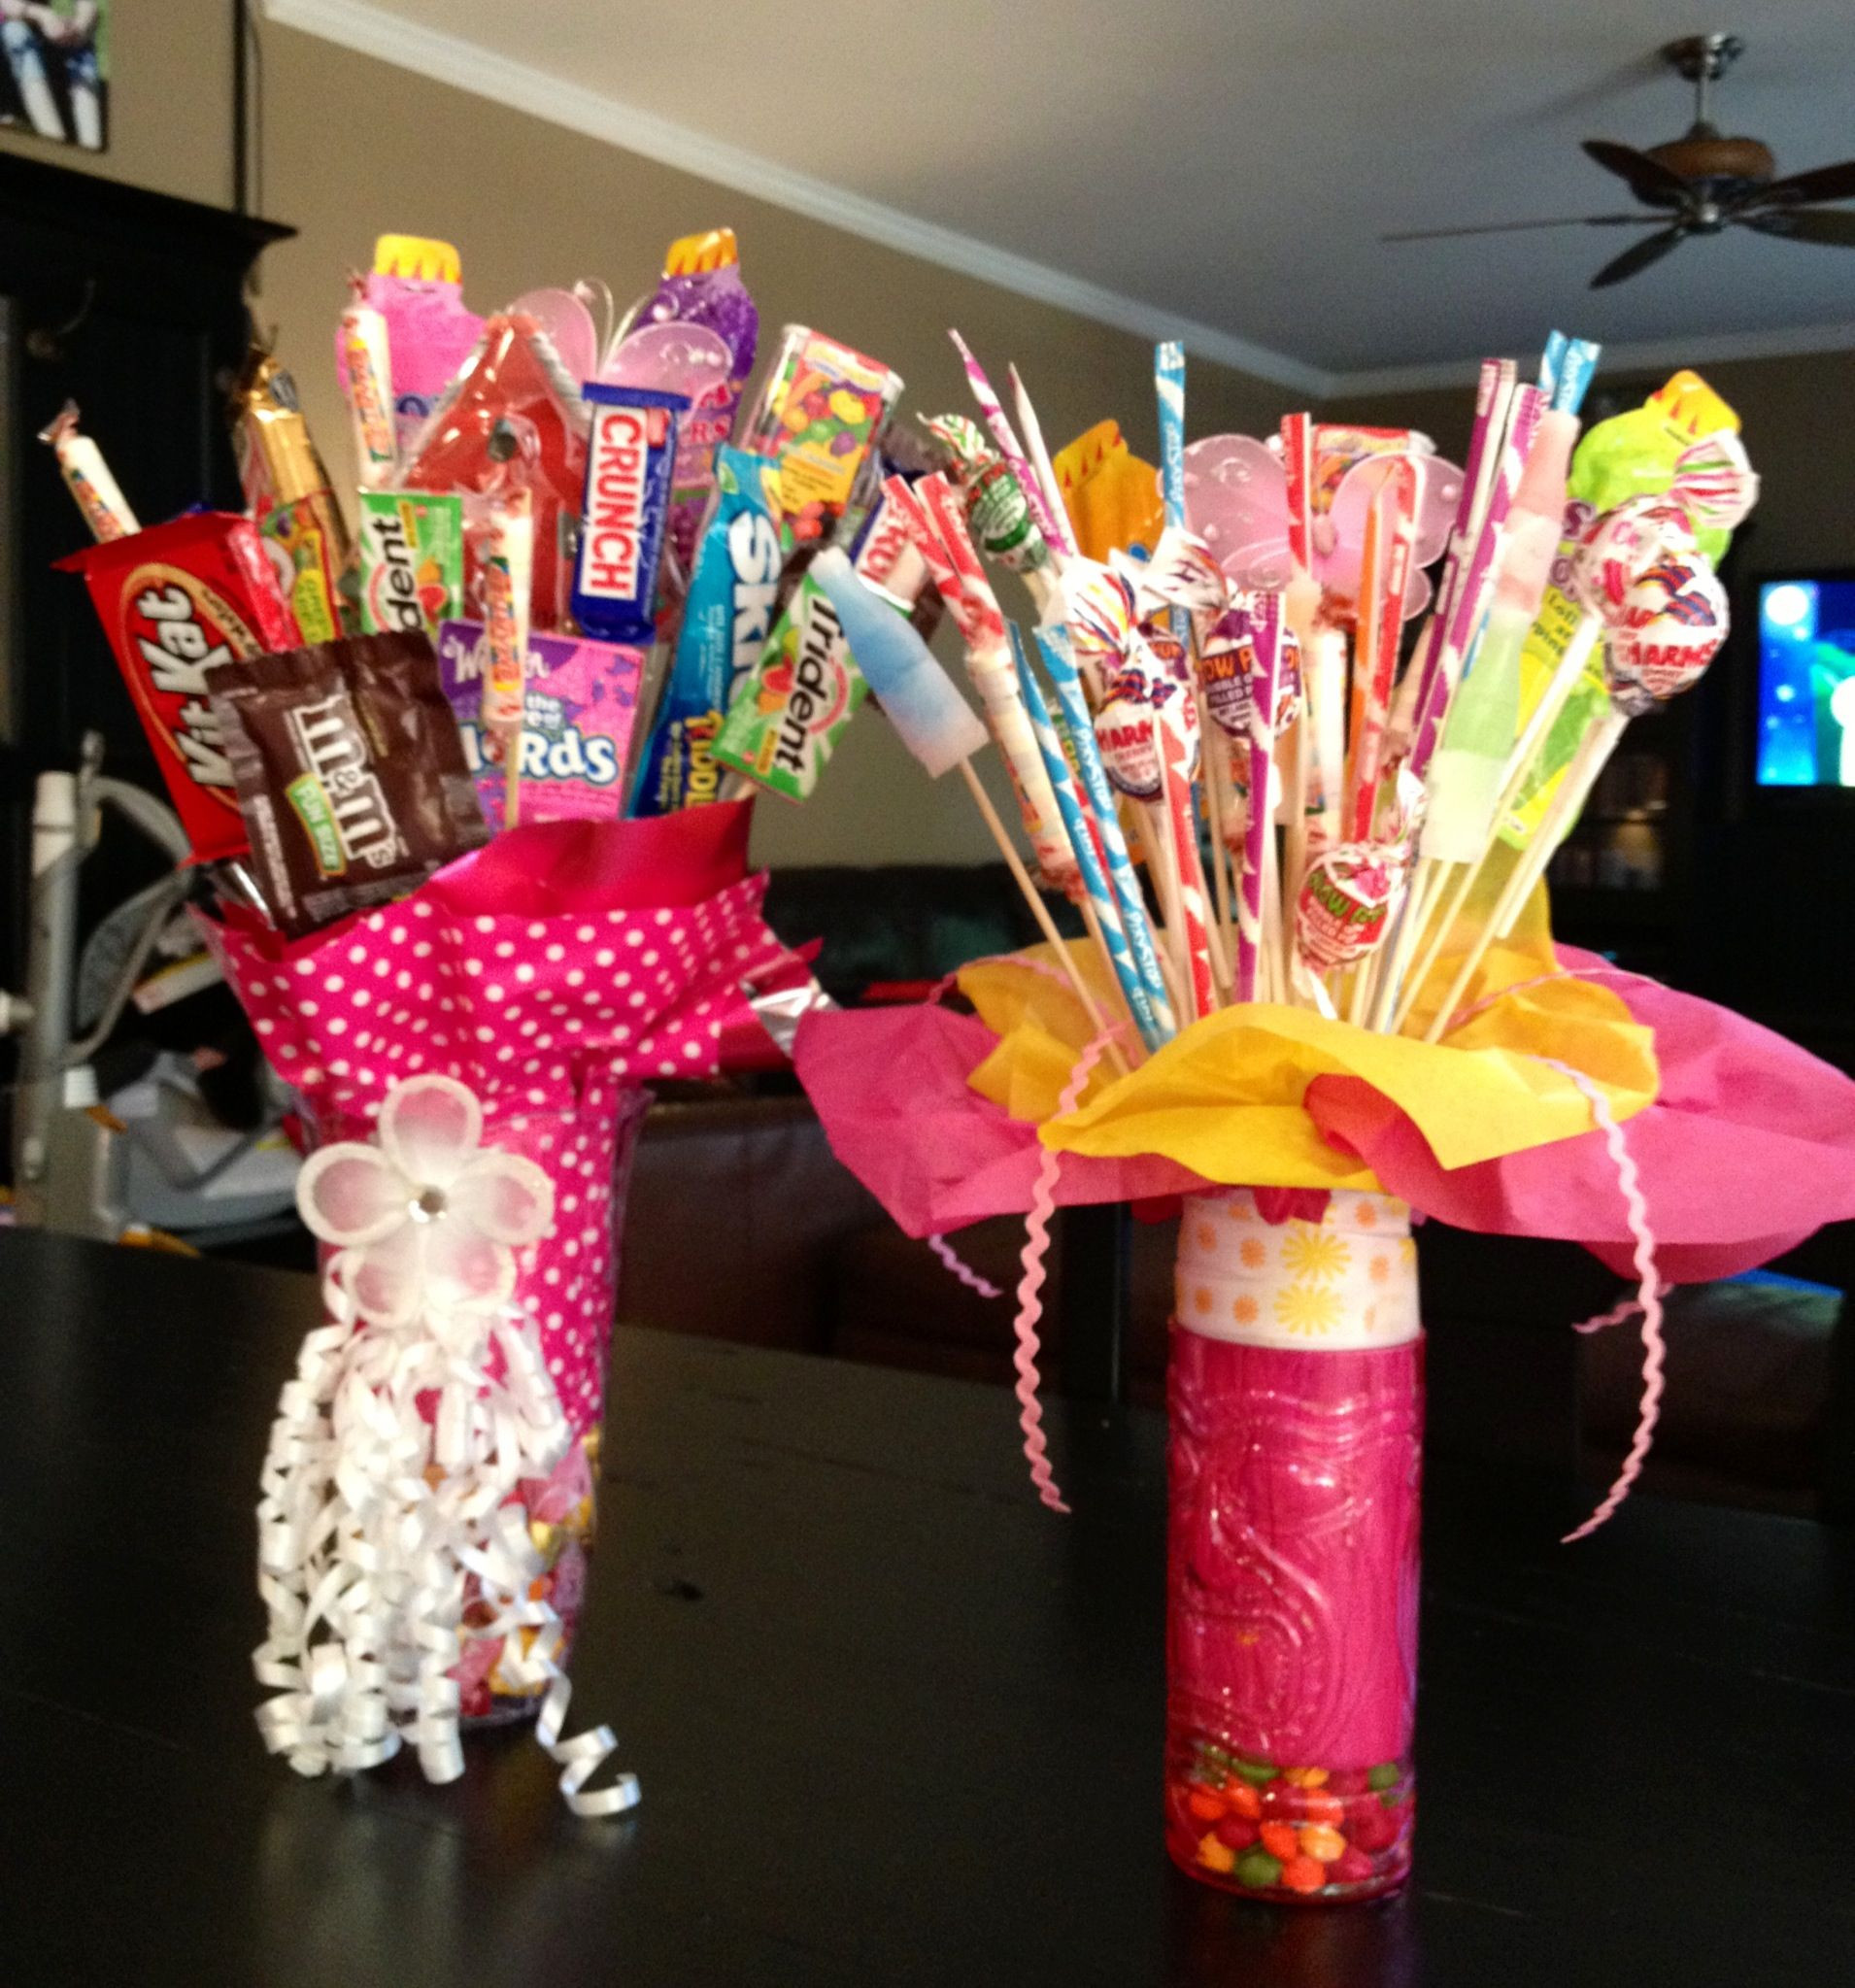 6Th Grade Graduation Gift Ideas
 Candy bouquets for 5th grade graduation Idea for Riley